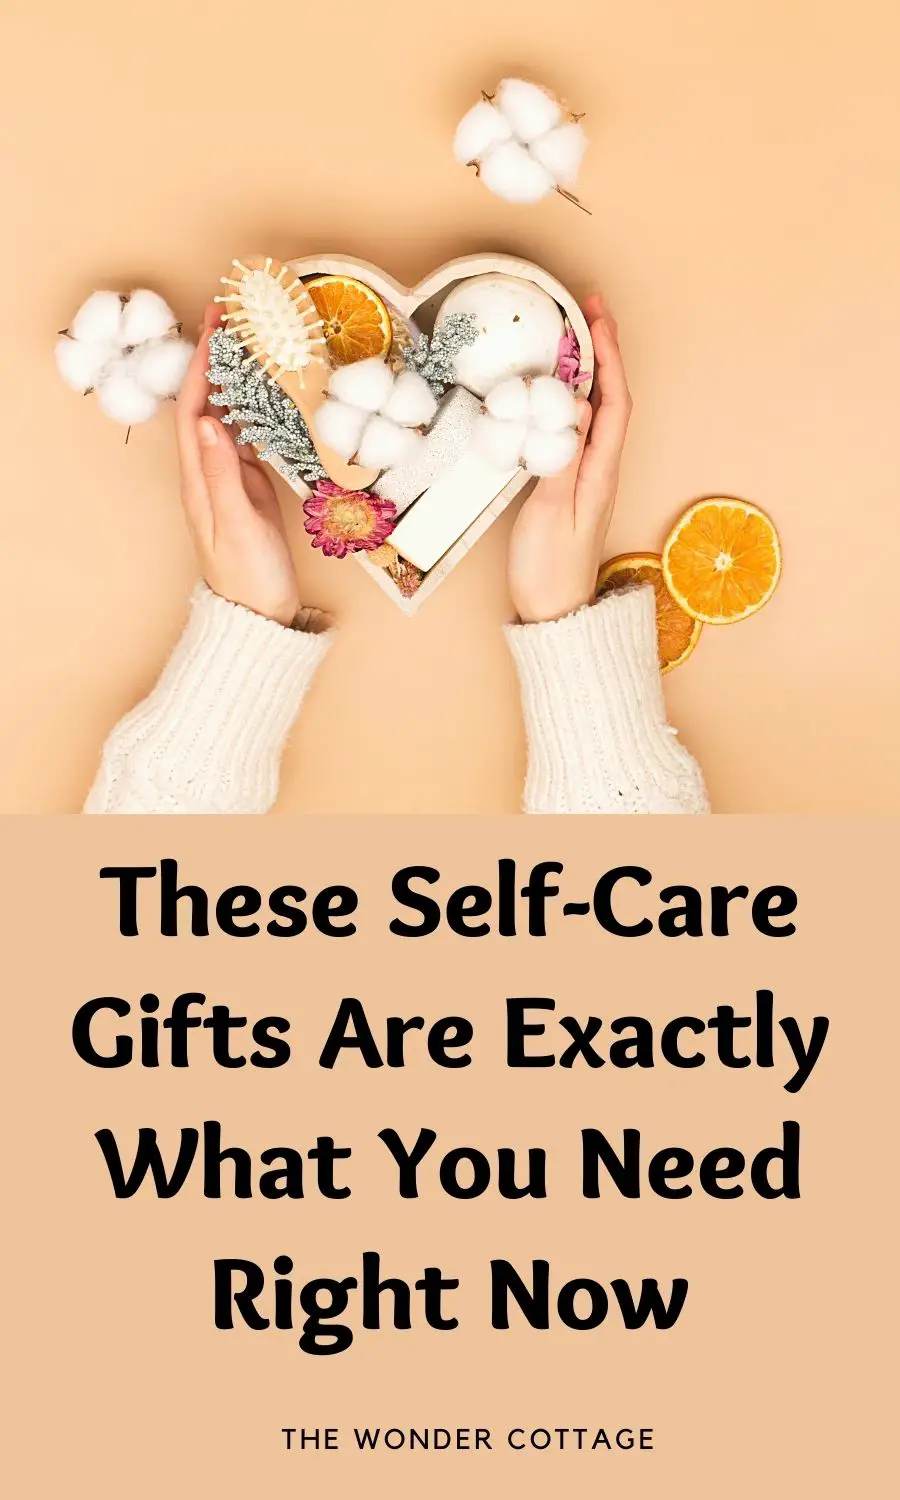 These Self-Care Gifts Are Exactly What You Need Right Now